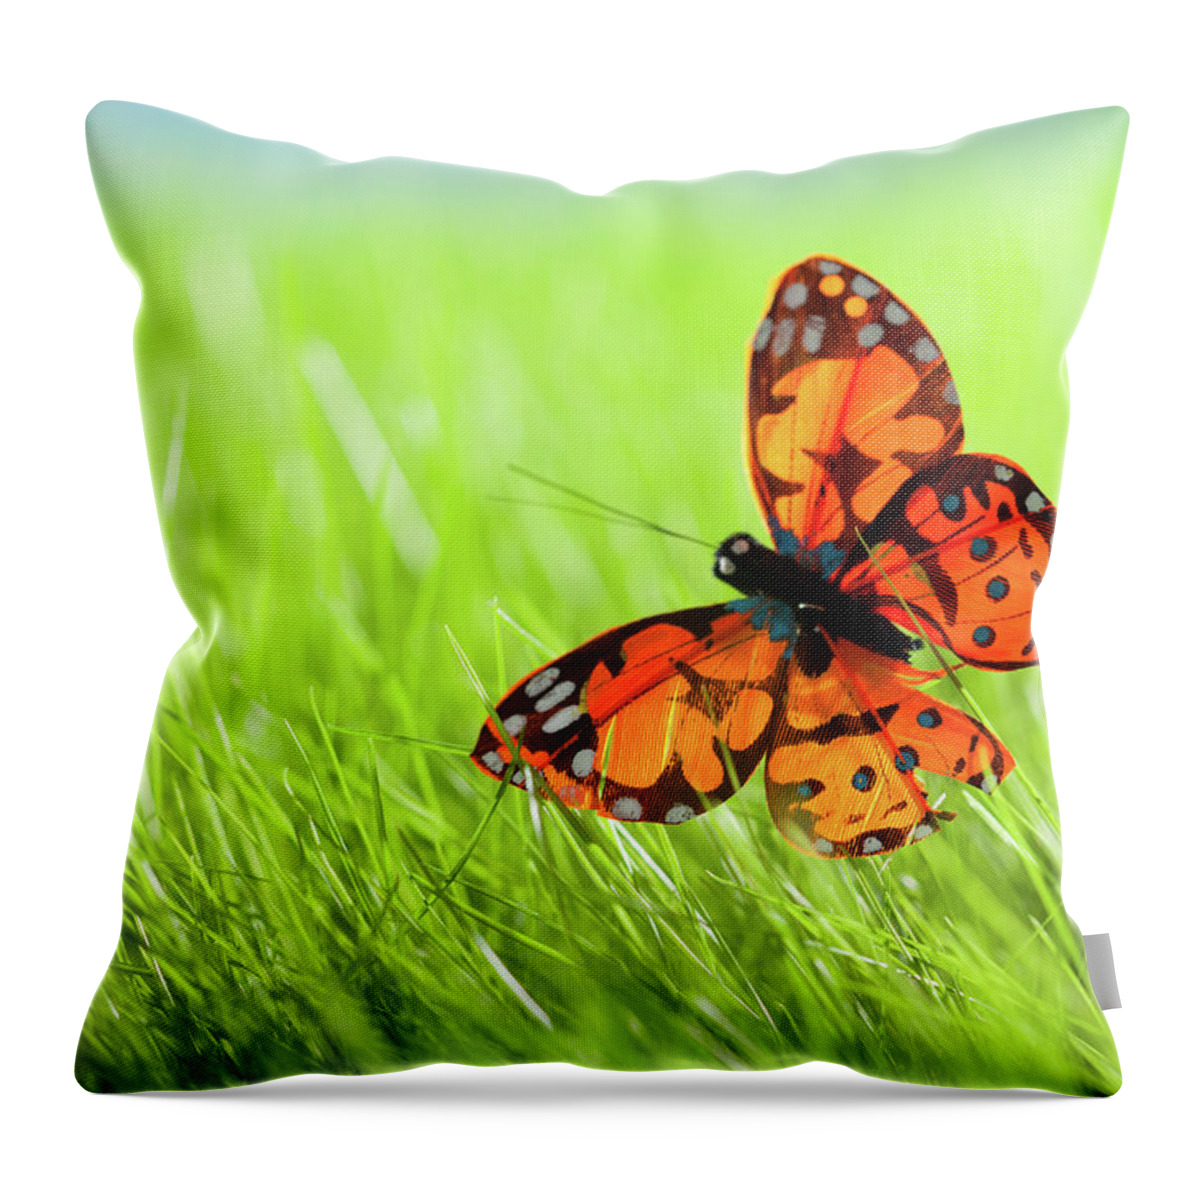 Grass Throw Pillow featuring the photograph Butterfly by Nadyaphoto